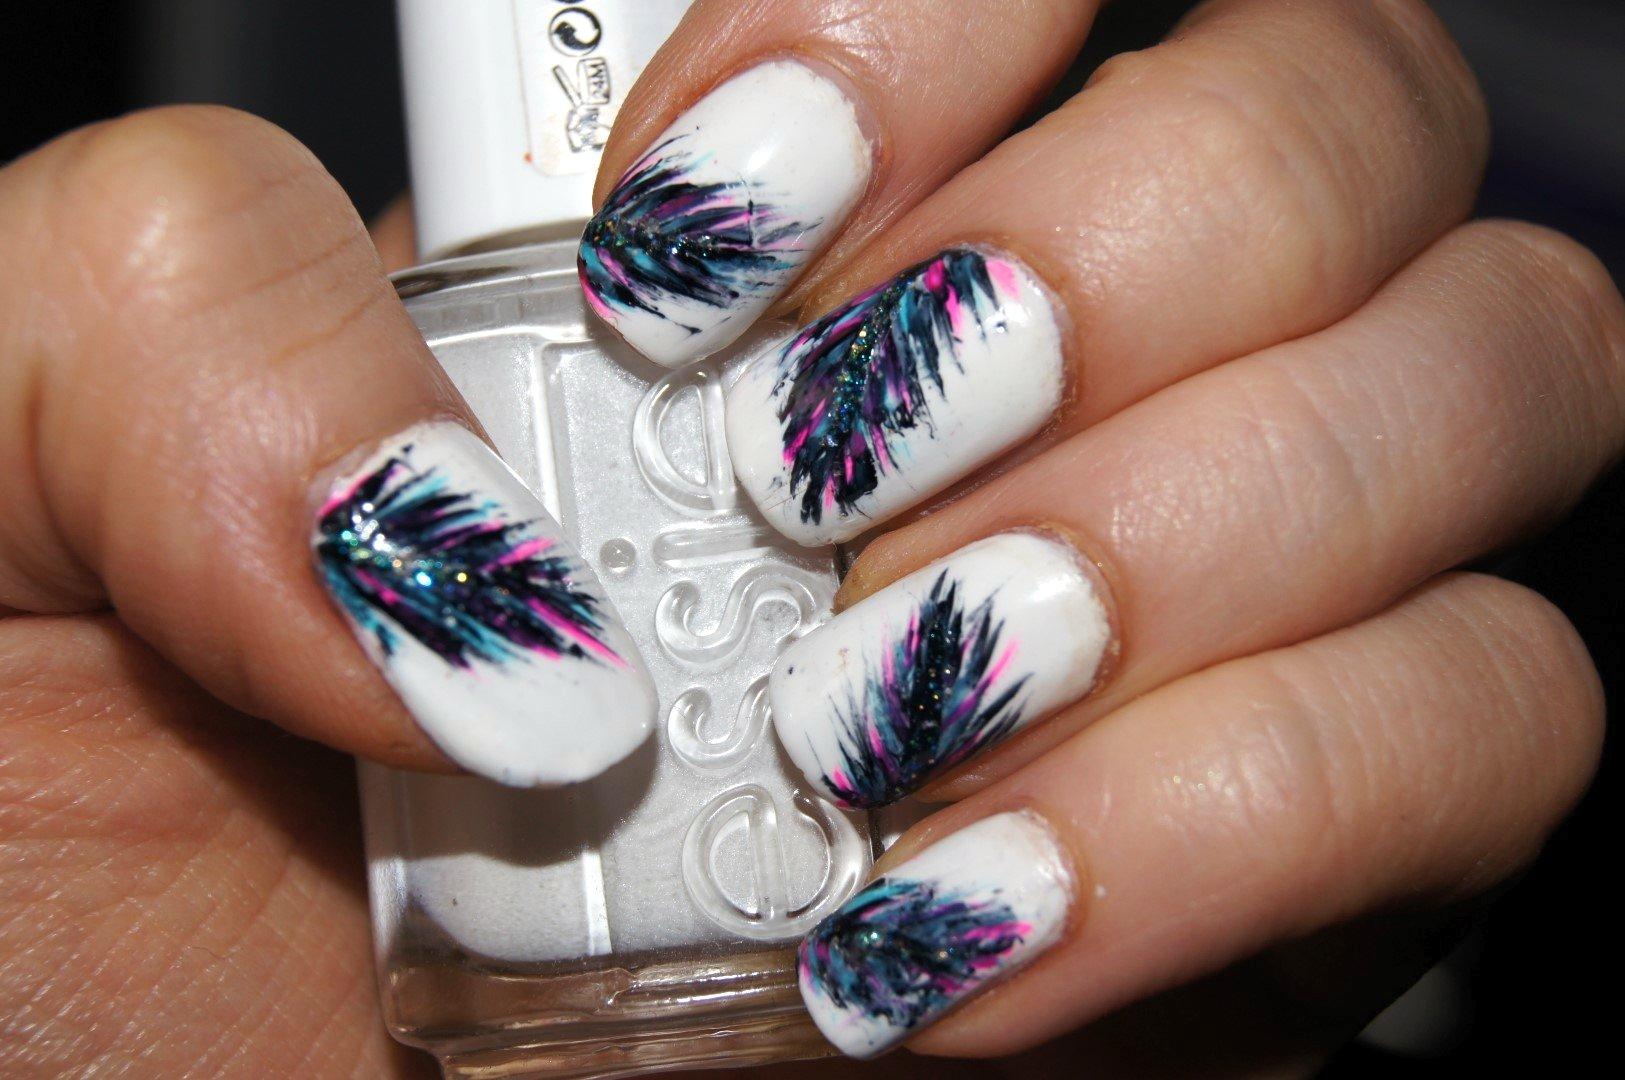 15 Acrylic Nail Designs and Ideas That Will Blow Your Mind